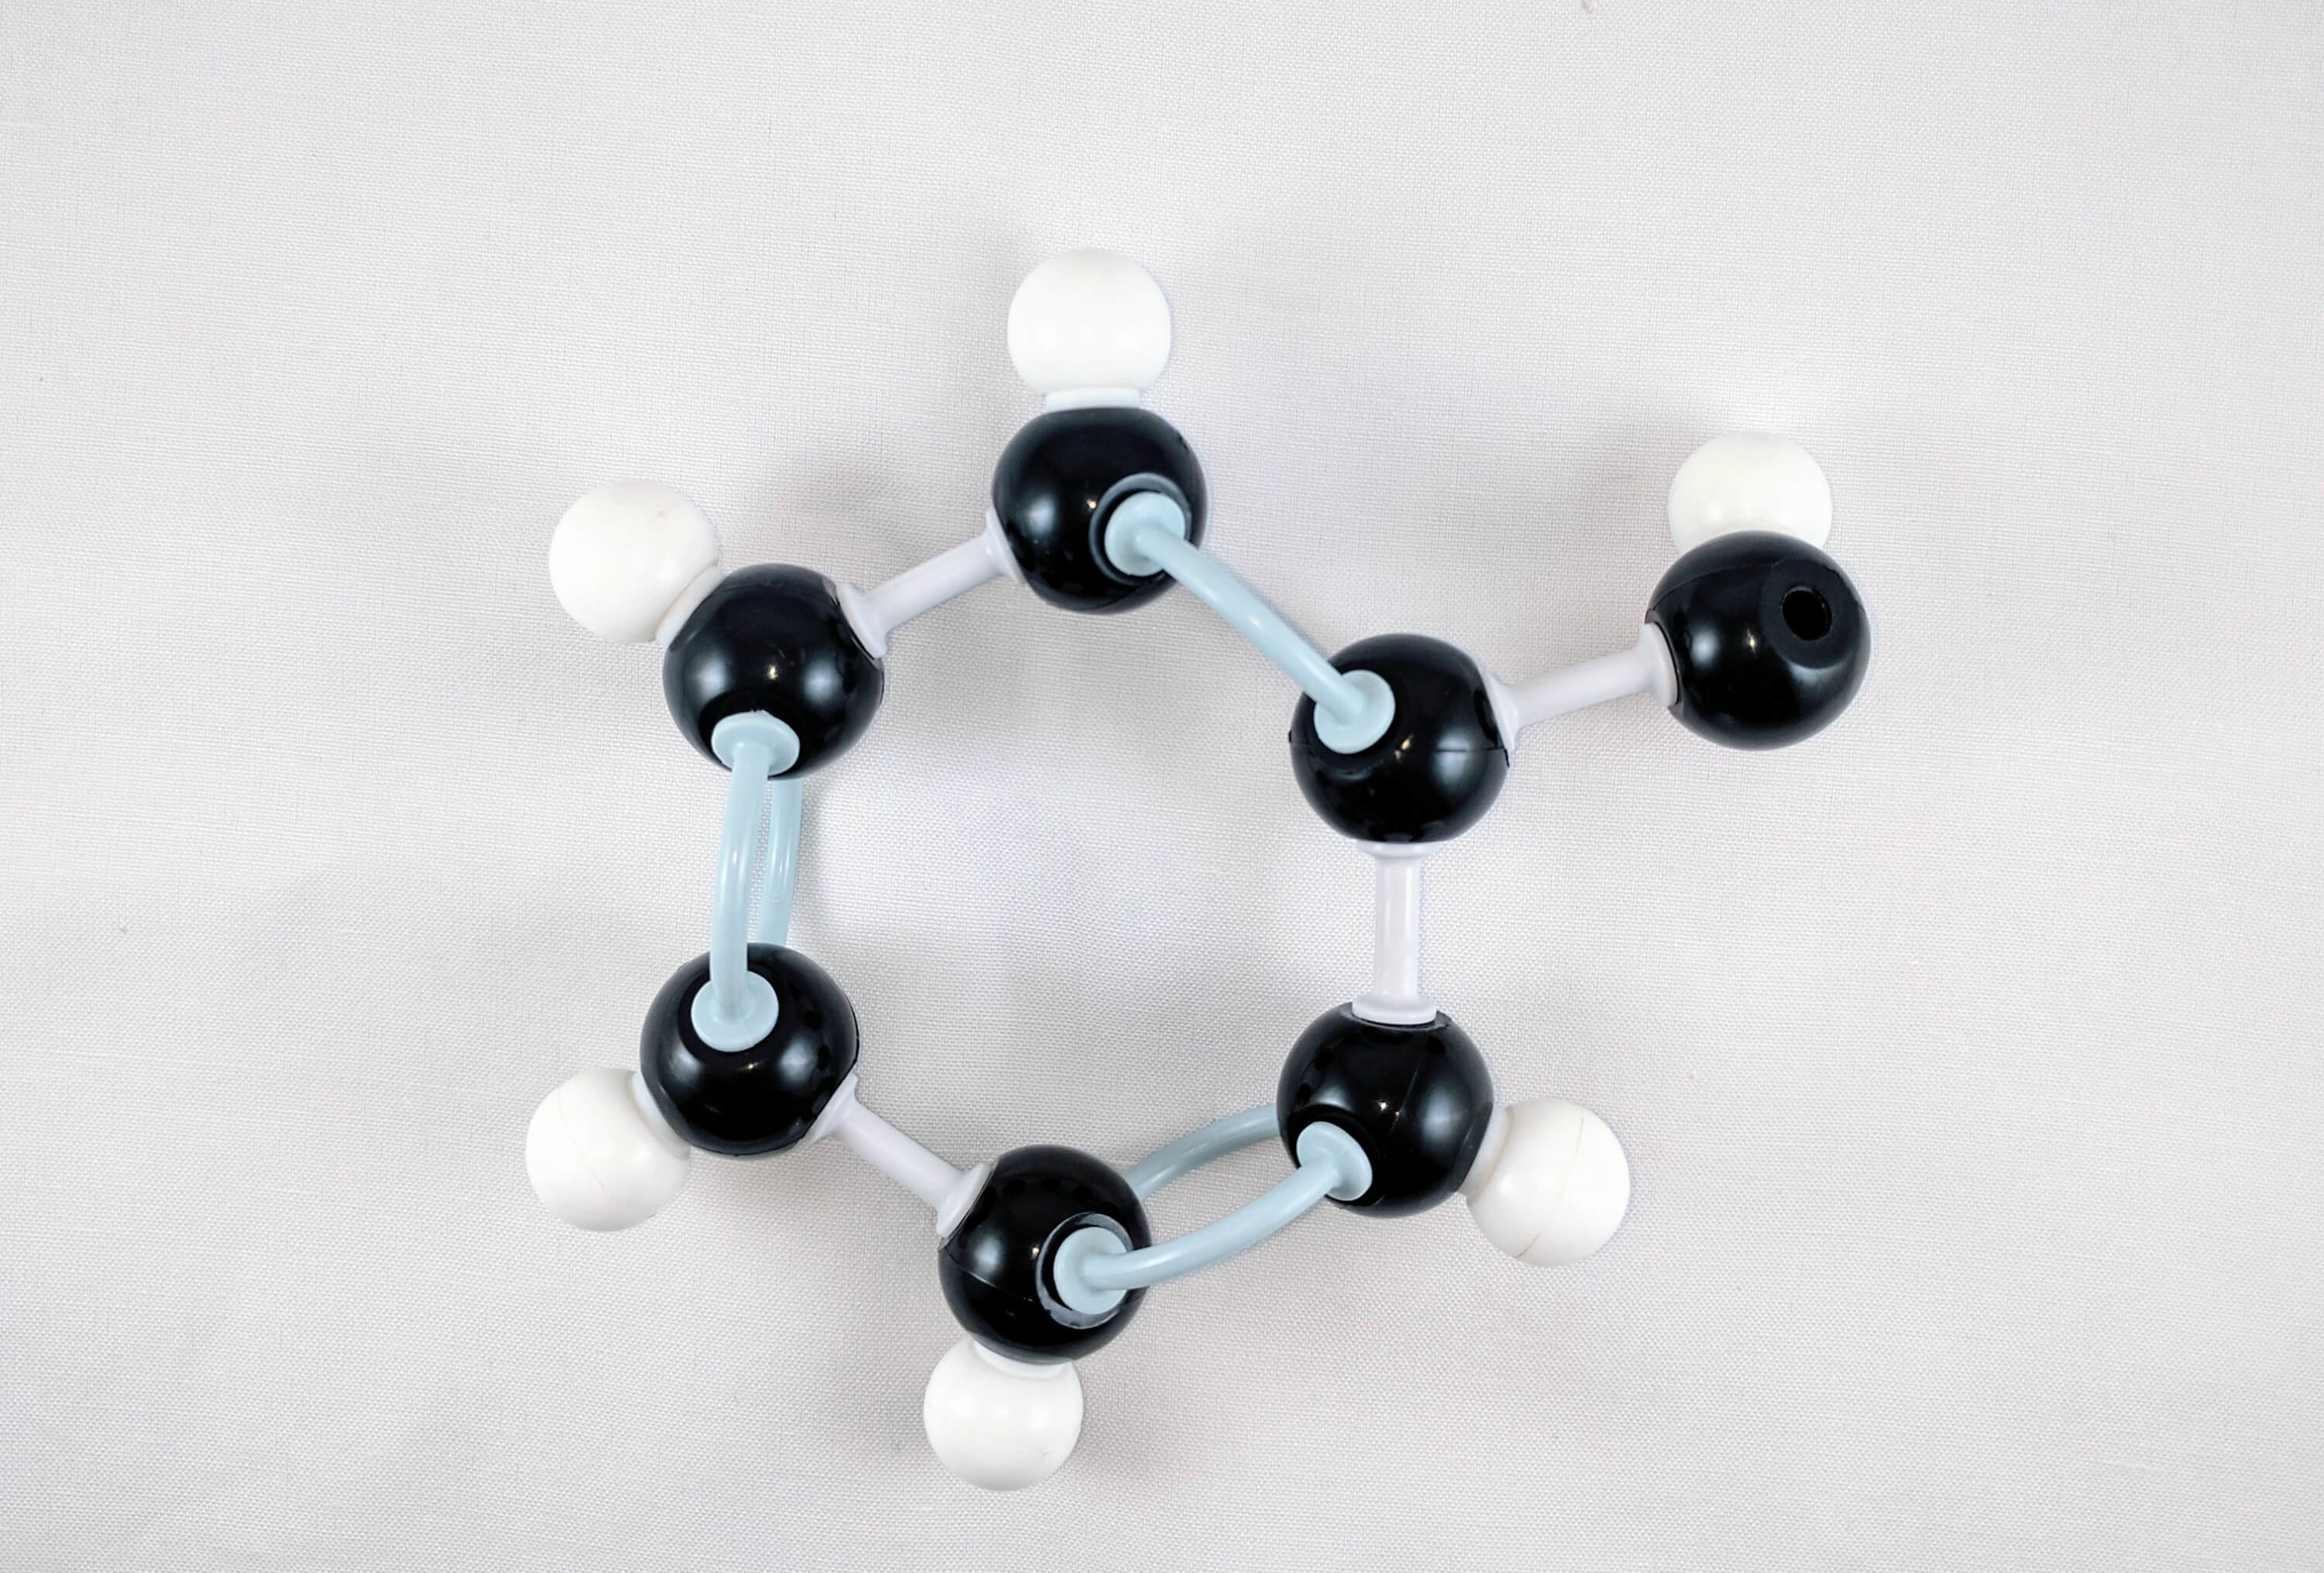 molecular model Substituted 6-Membered Carbon Ring